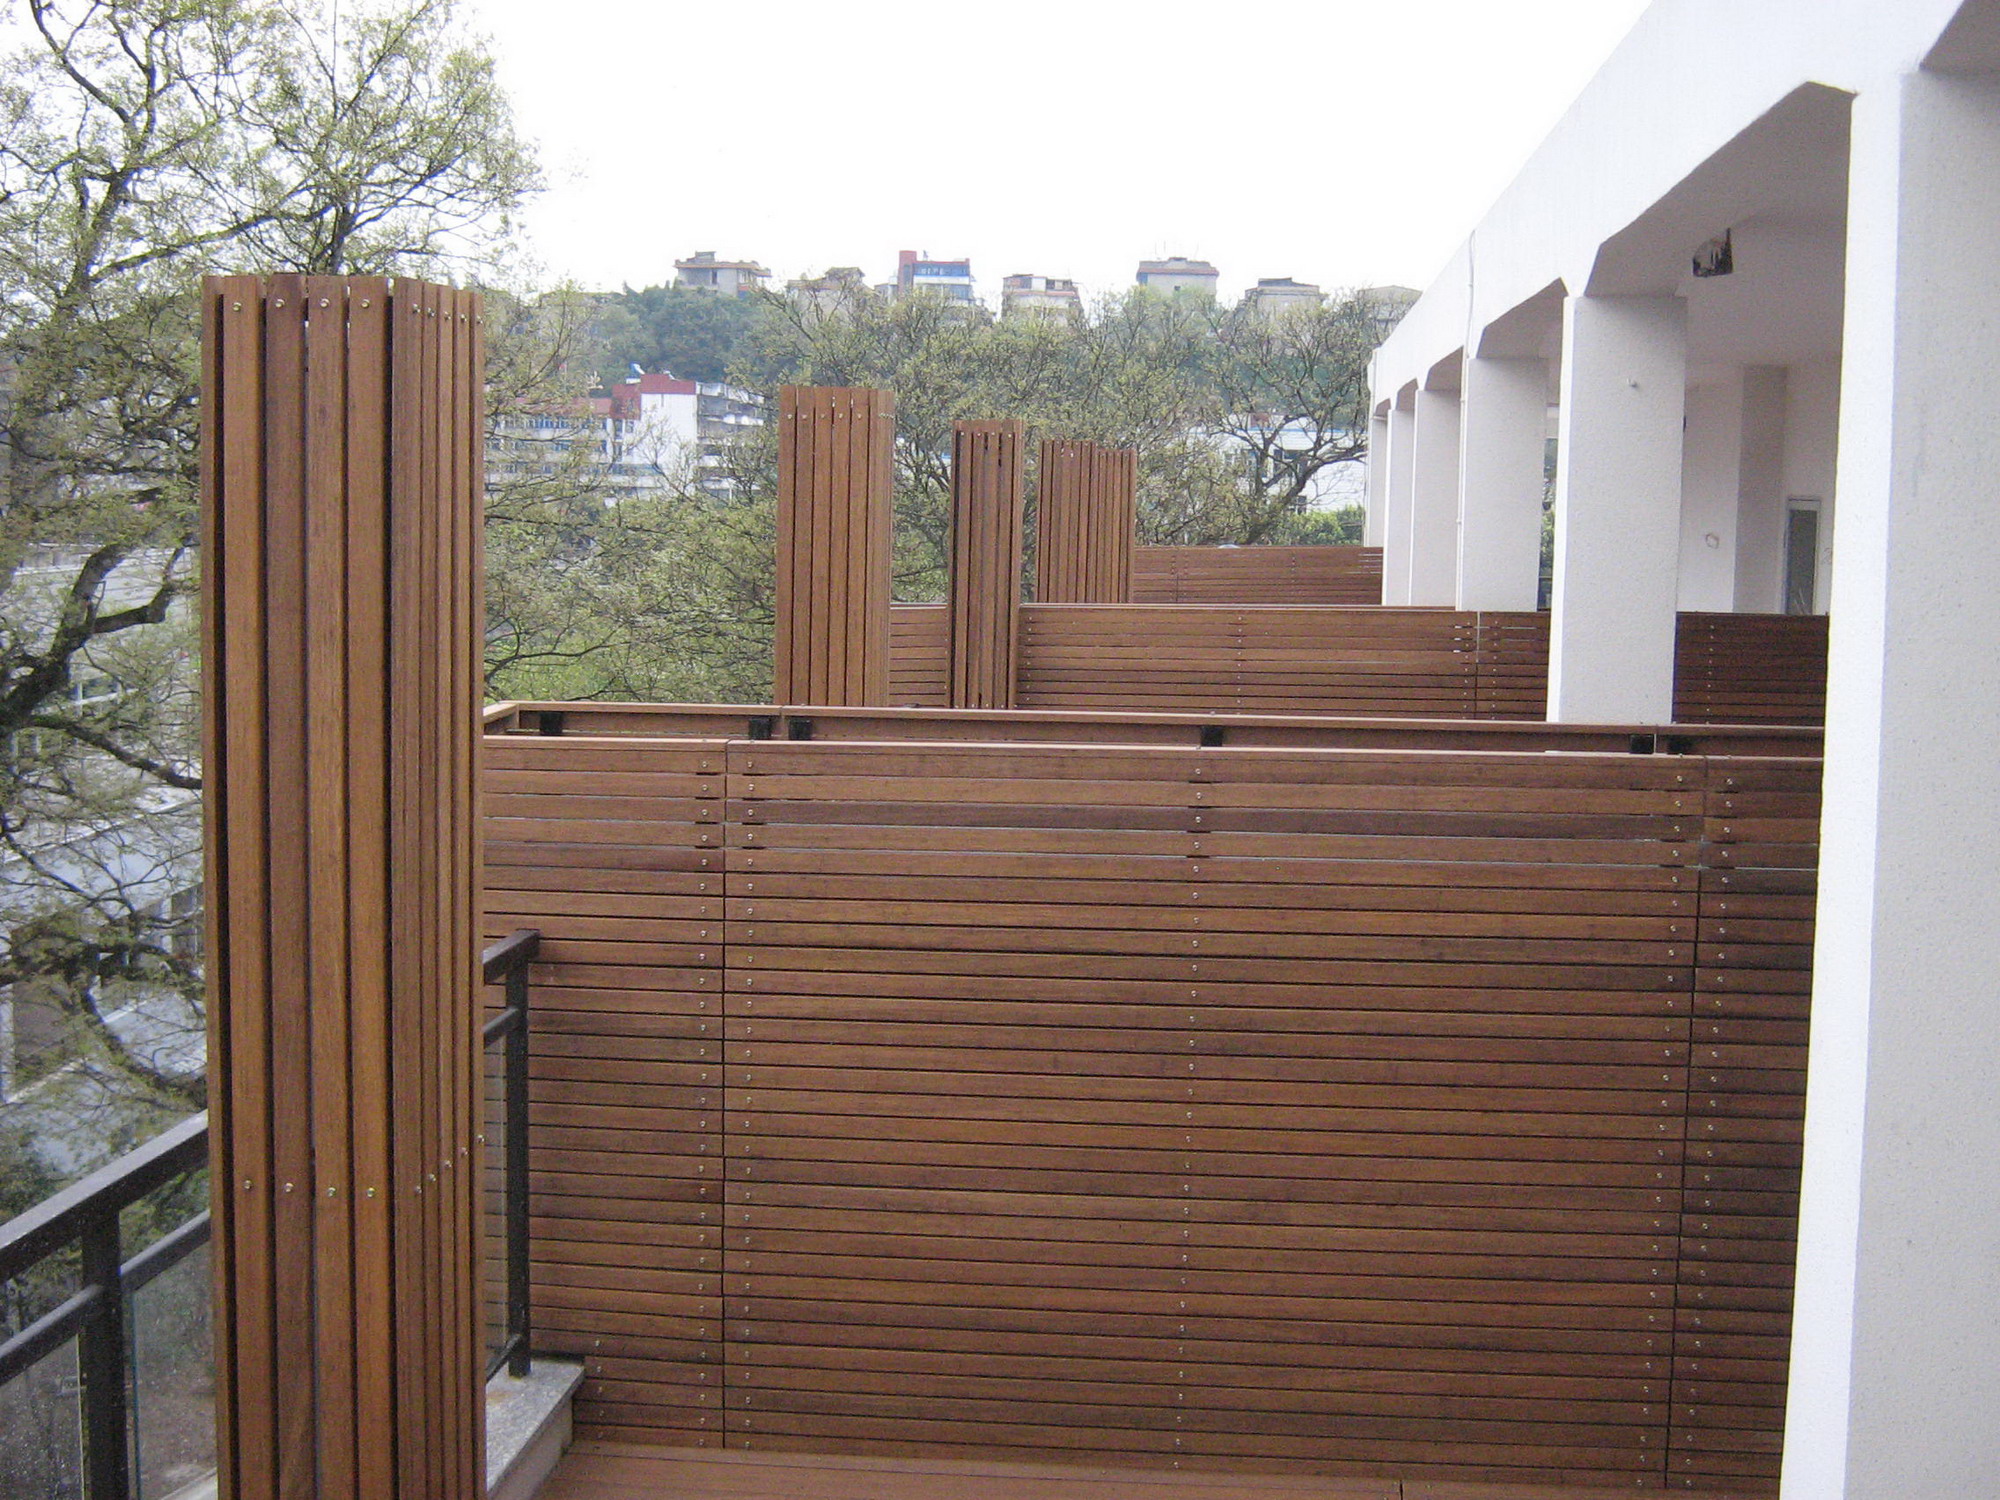 Outdoor Bamboo Design Spacious Outdoor Bamboo Wall Panels Design With Traditional Style For Home Terrace Decoration For Home Inspiration To Your House Decoration Attractive Bamboo Wall Panels As Eco Friendly Decoration